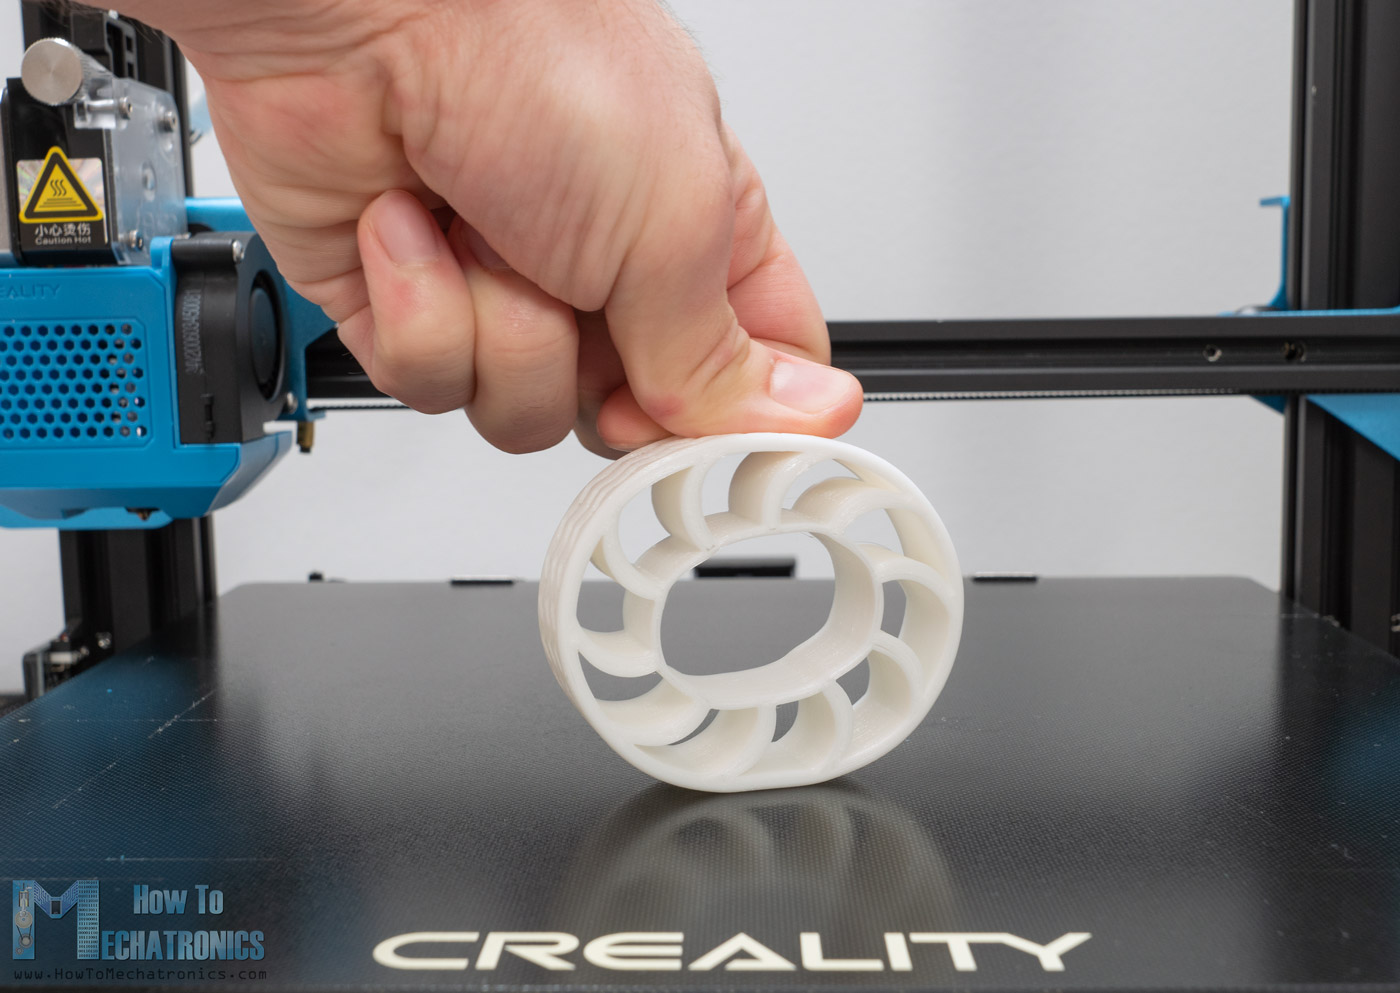 Flexible Wheel 3D printed with Flexible Filament on CR-10 V3 Direct Drive Extruder